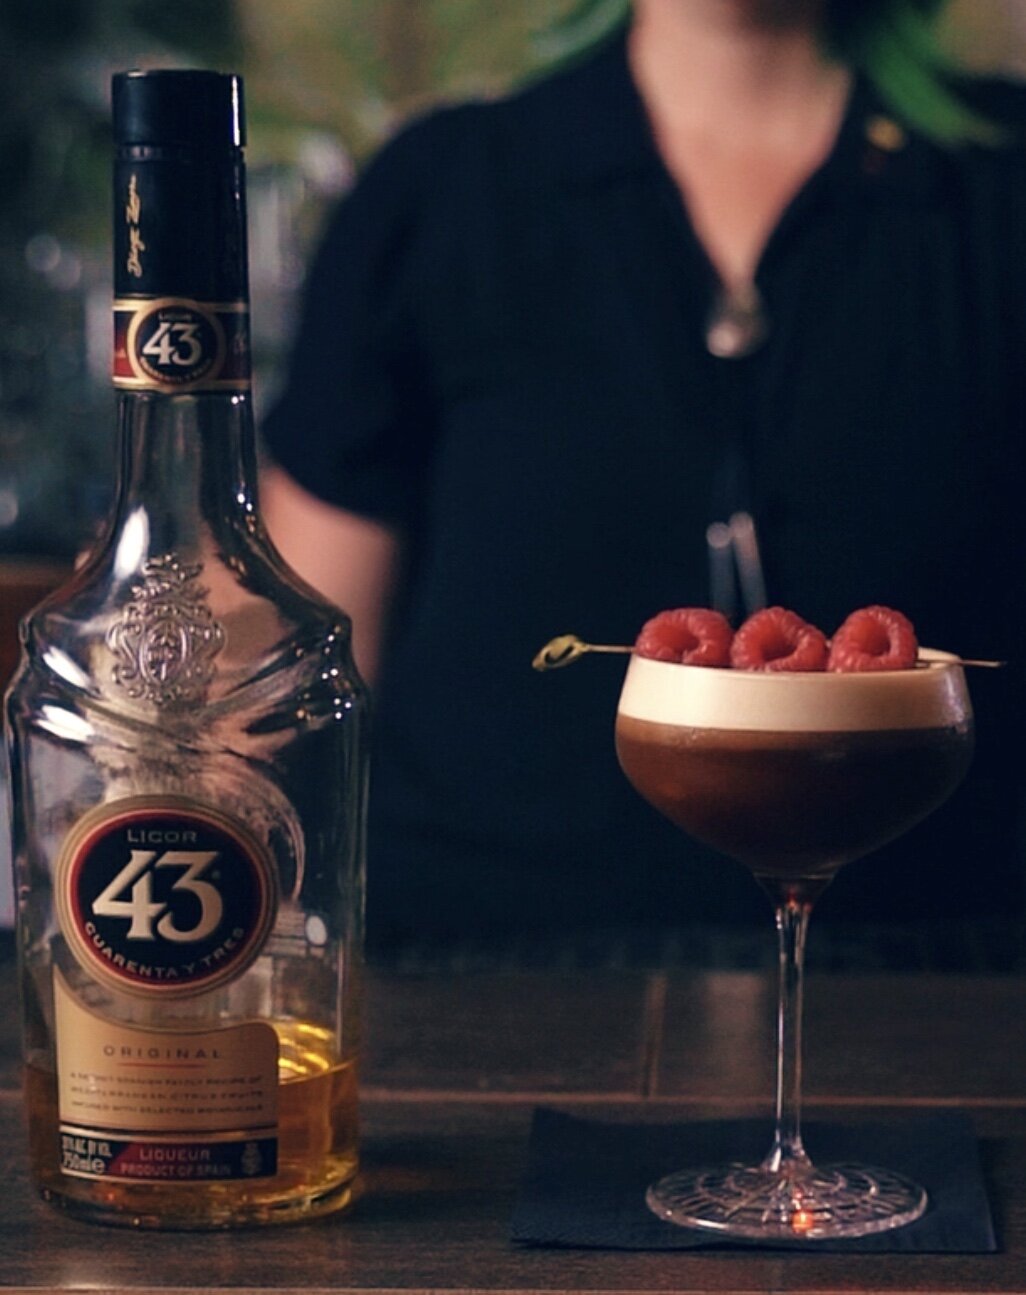 Challenge Deja — Association Coffee Licor Winning Meet Specialty the of Brew: 43 Cocktail the Bartenders & Baristas